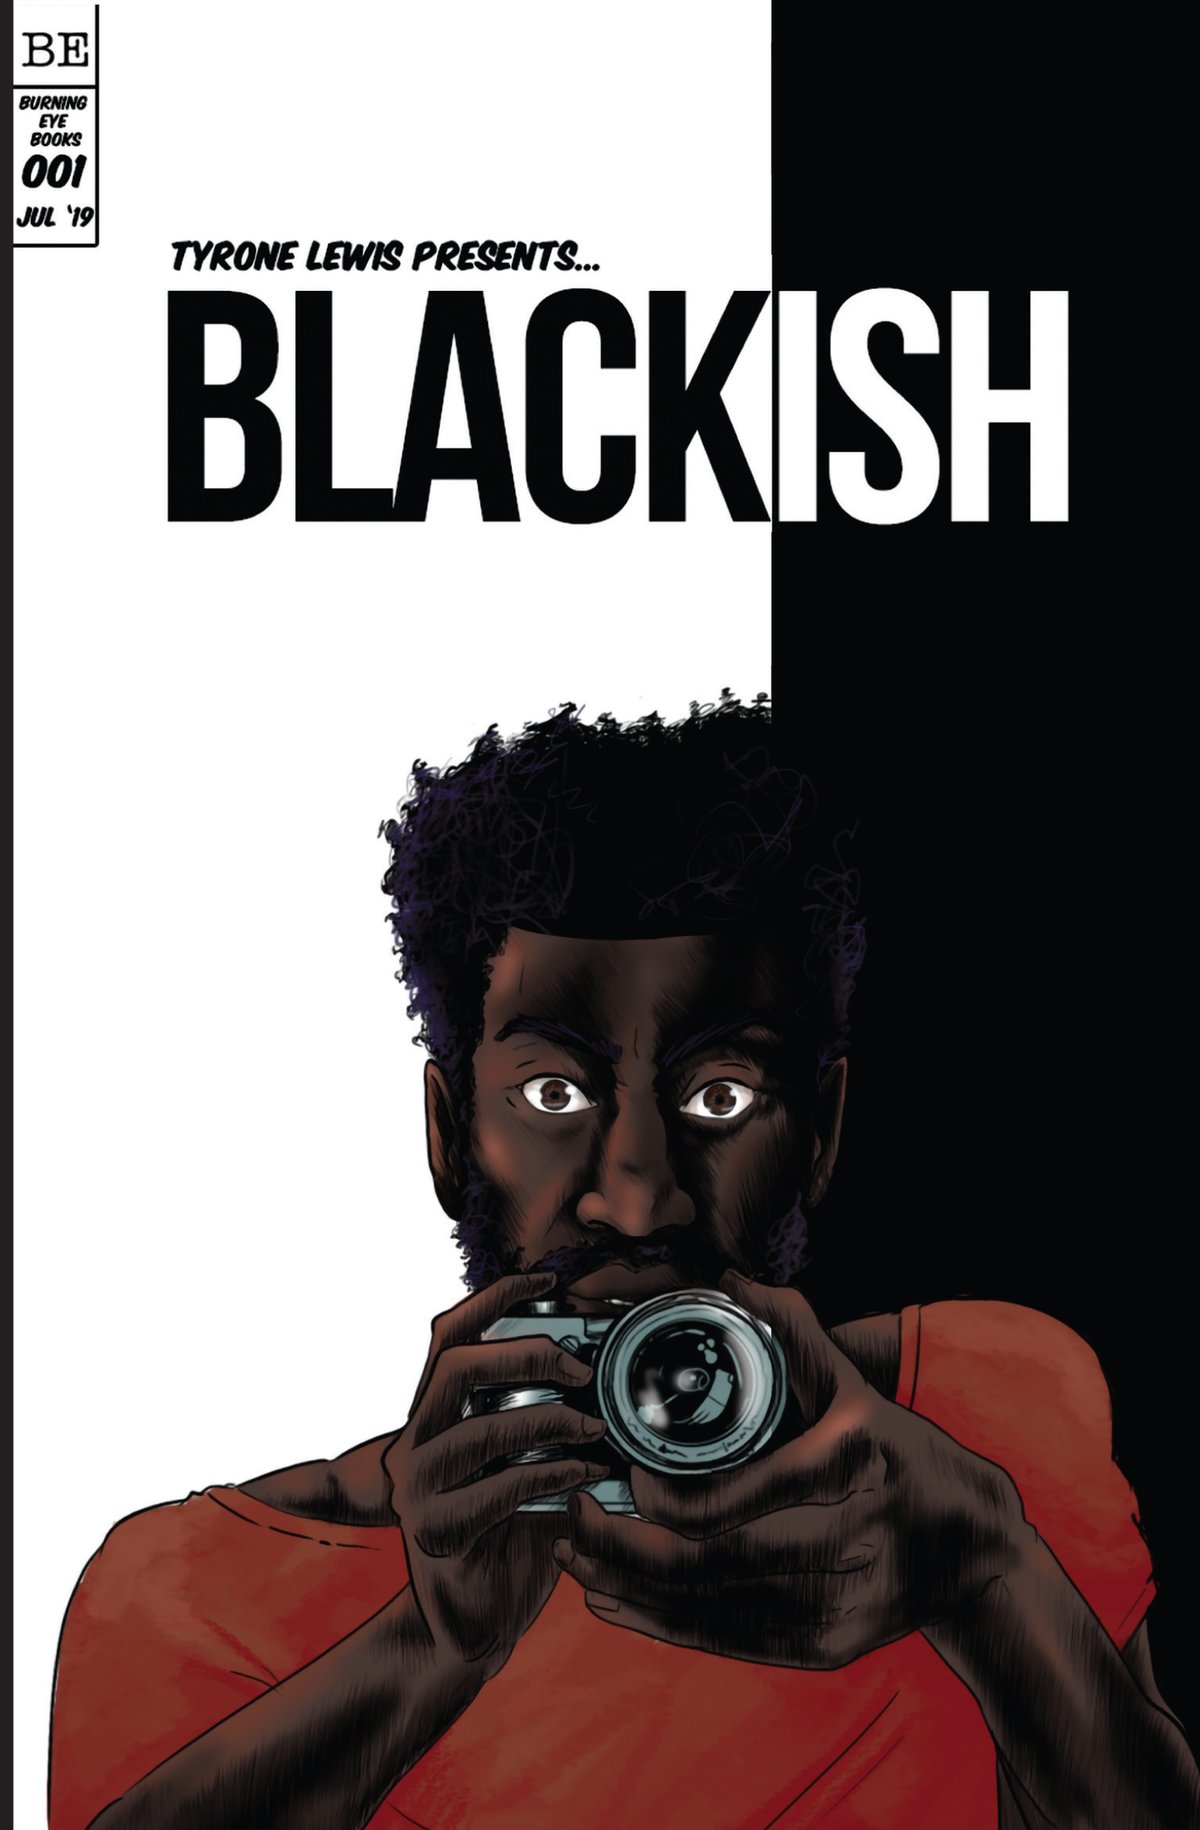 Image of Blackish by Tyrone Lewis